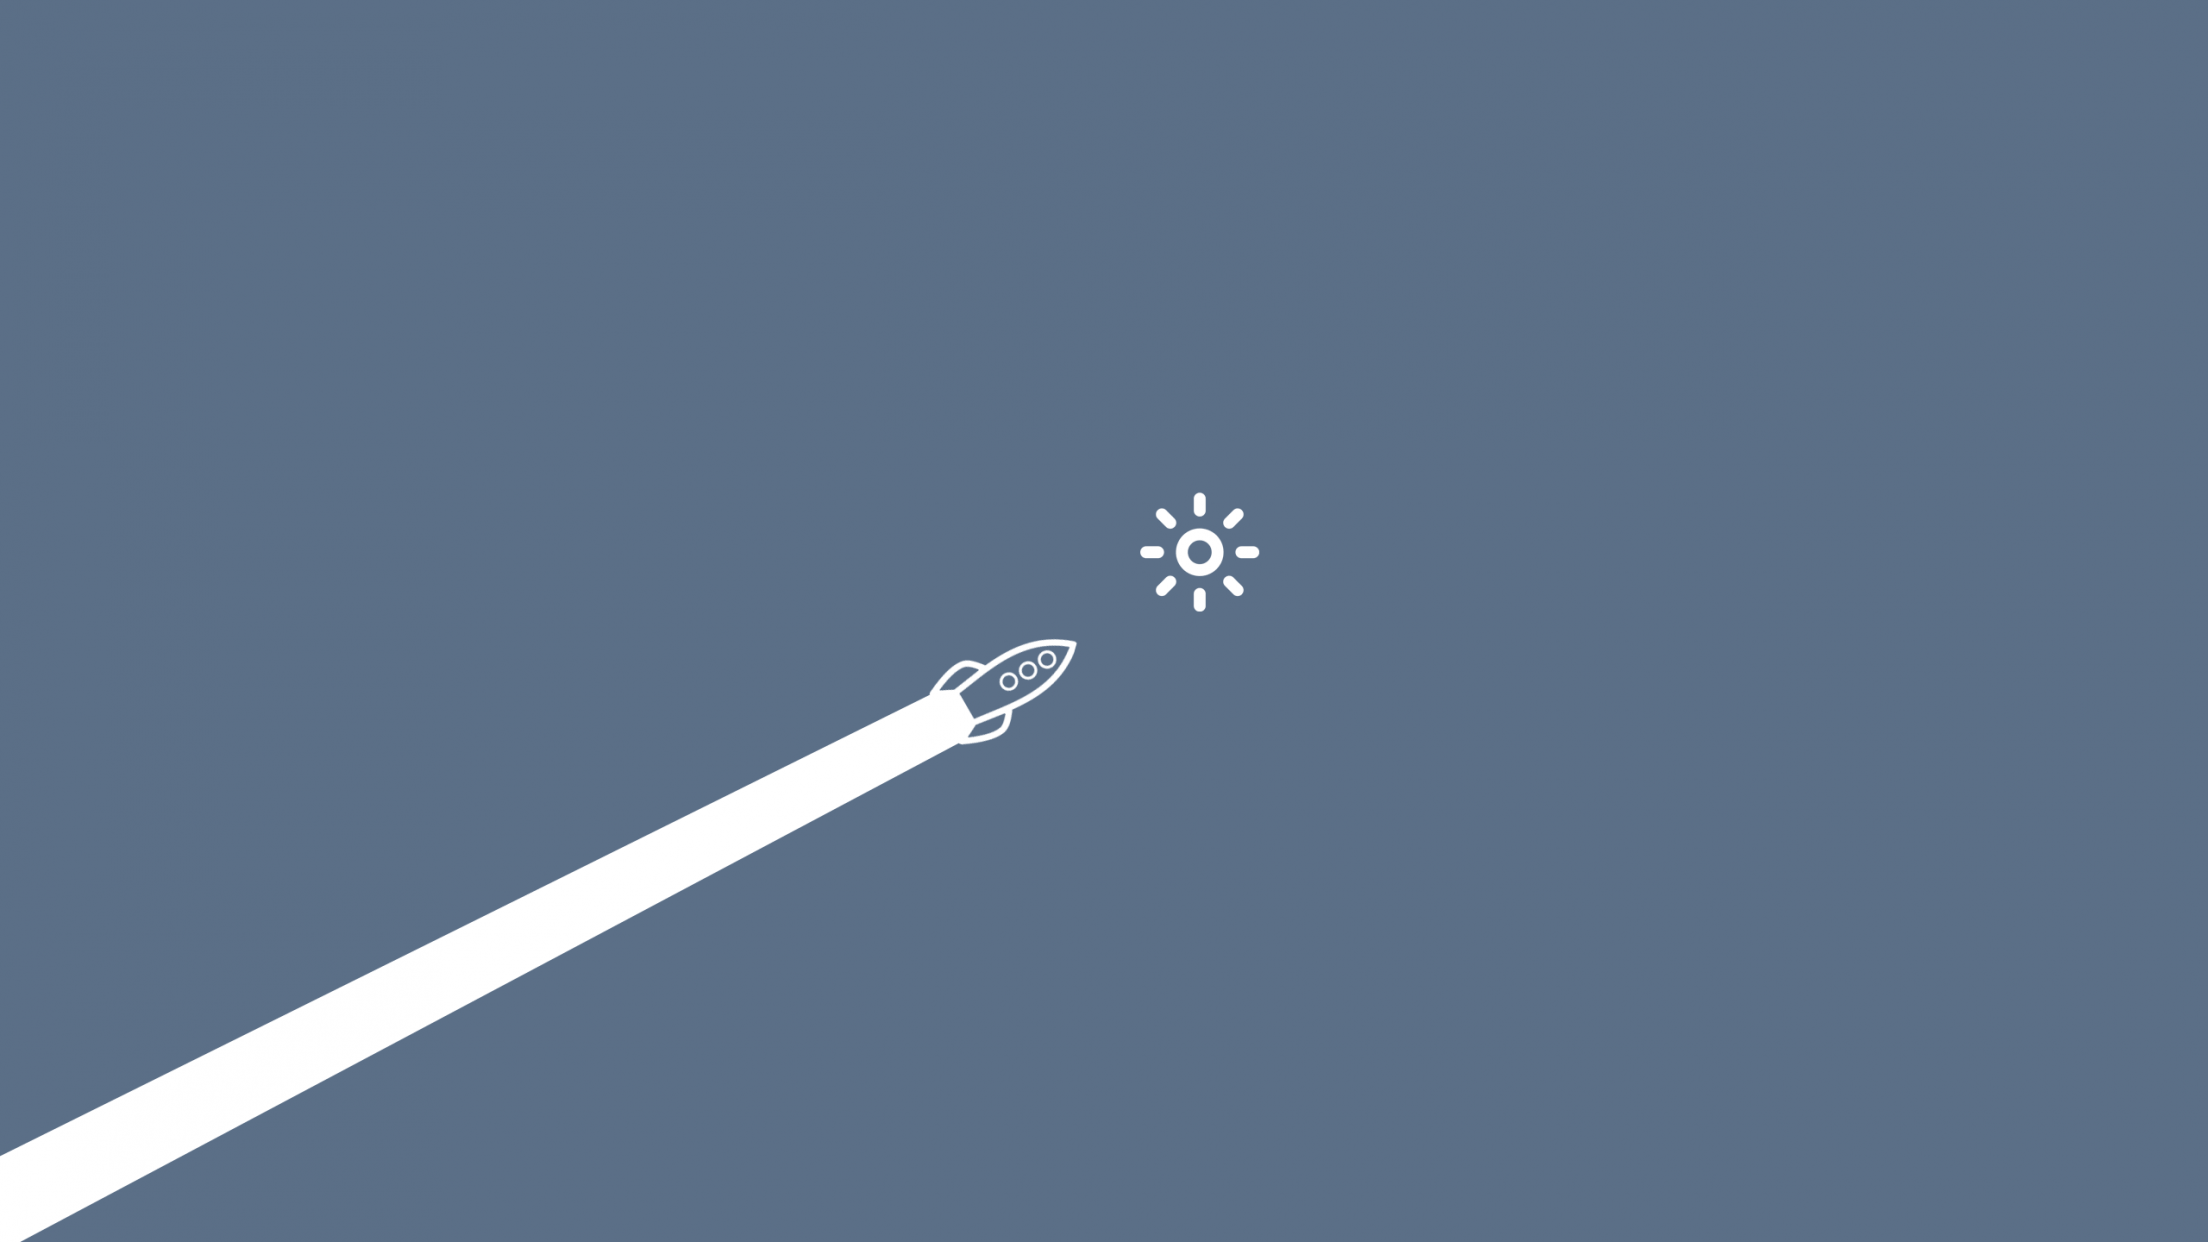 Minimalist Wallpaper Of A Rocket Flying To The Sun